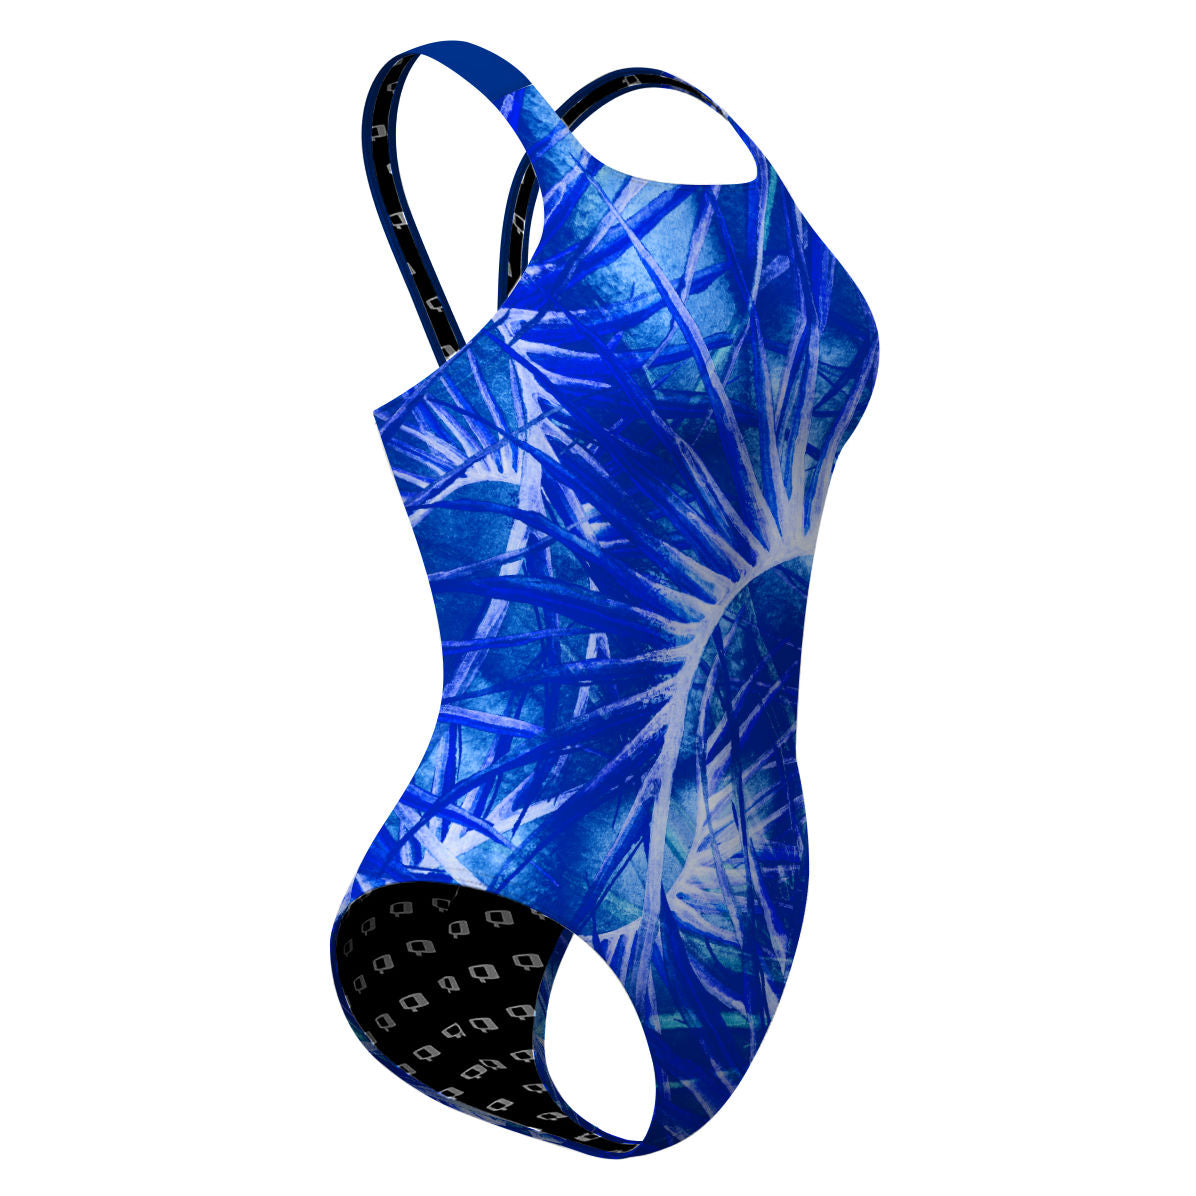 Tropical Distortion - Classic Strap Swimsuit